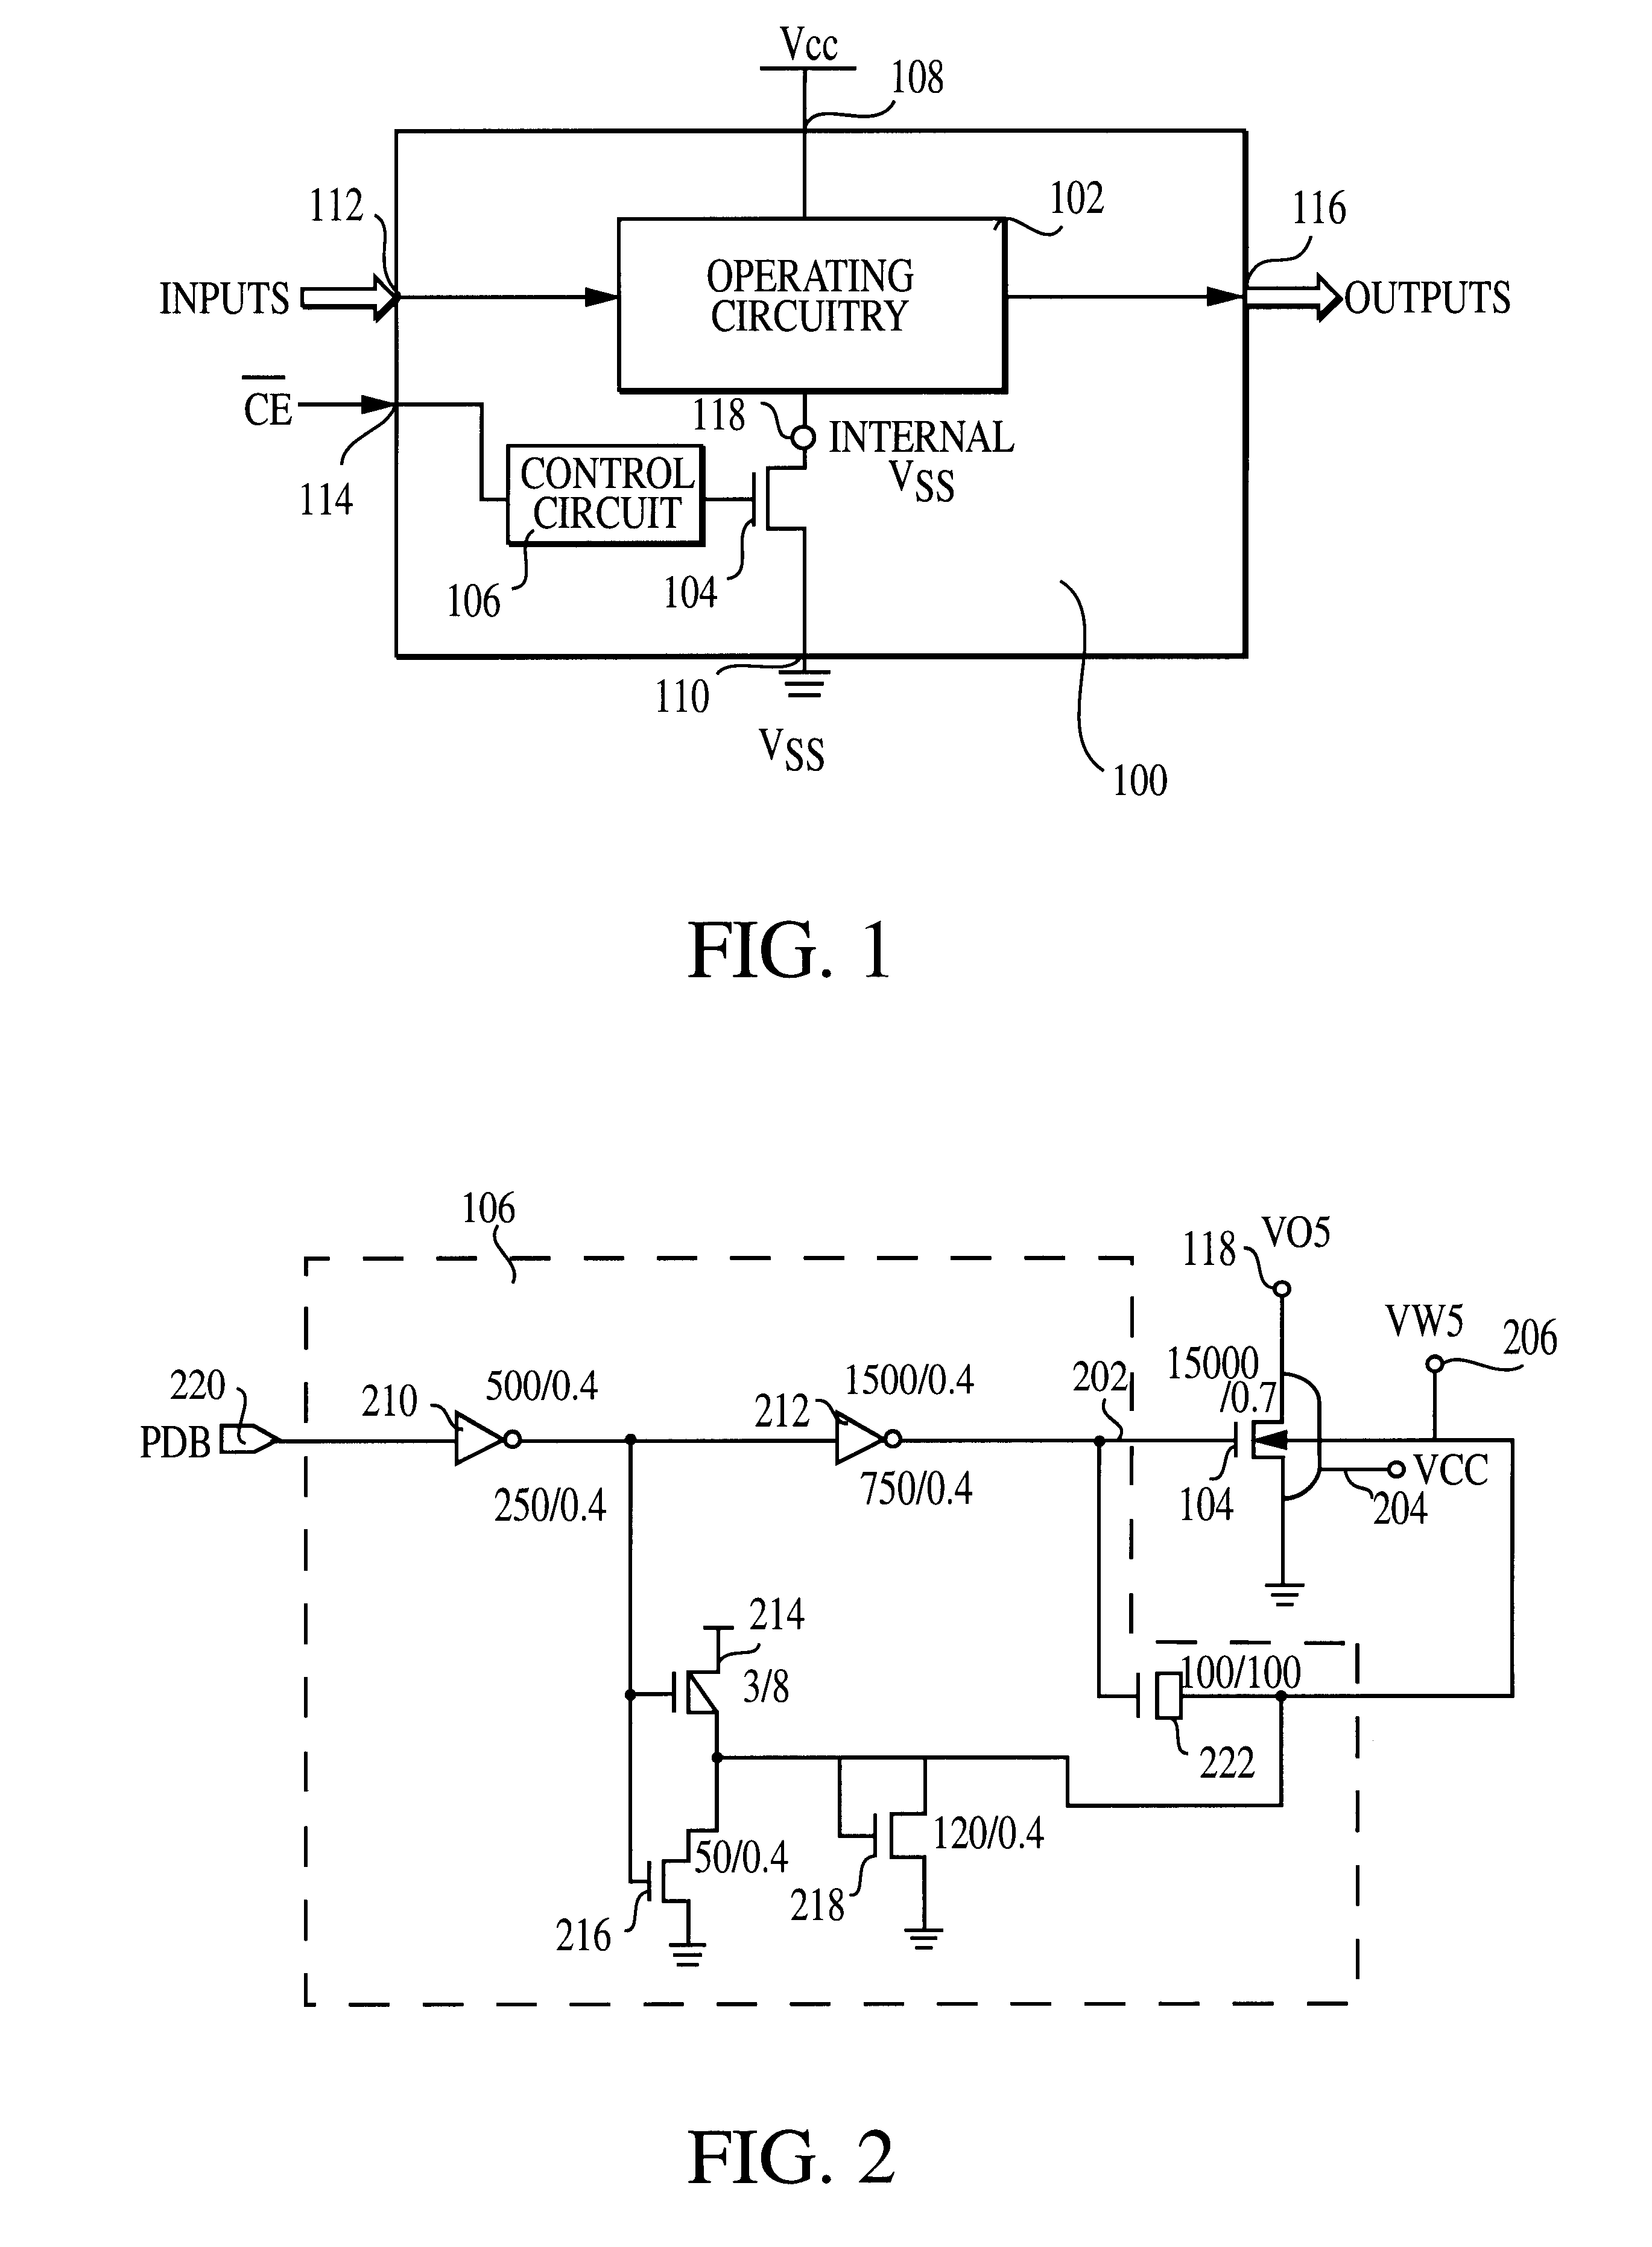 Use of biased high threshold voltage transistor to eliminate standby current in low voltage integrated circuits